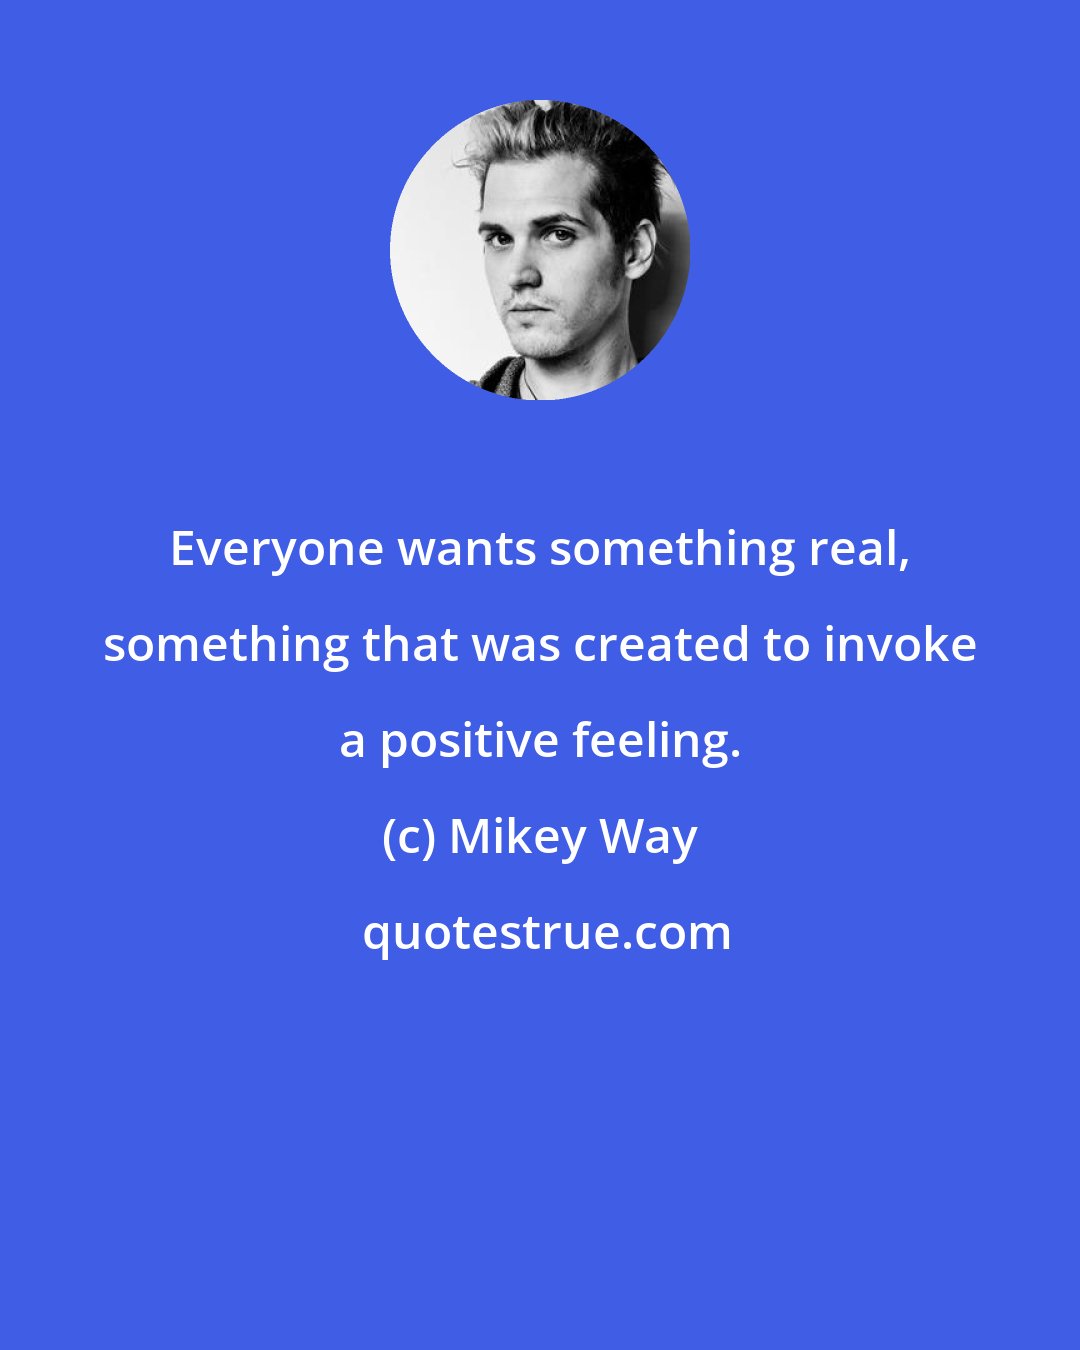 Mikey Way: Everyone wants something real, something that was created to invoke a positive feeling.